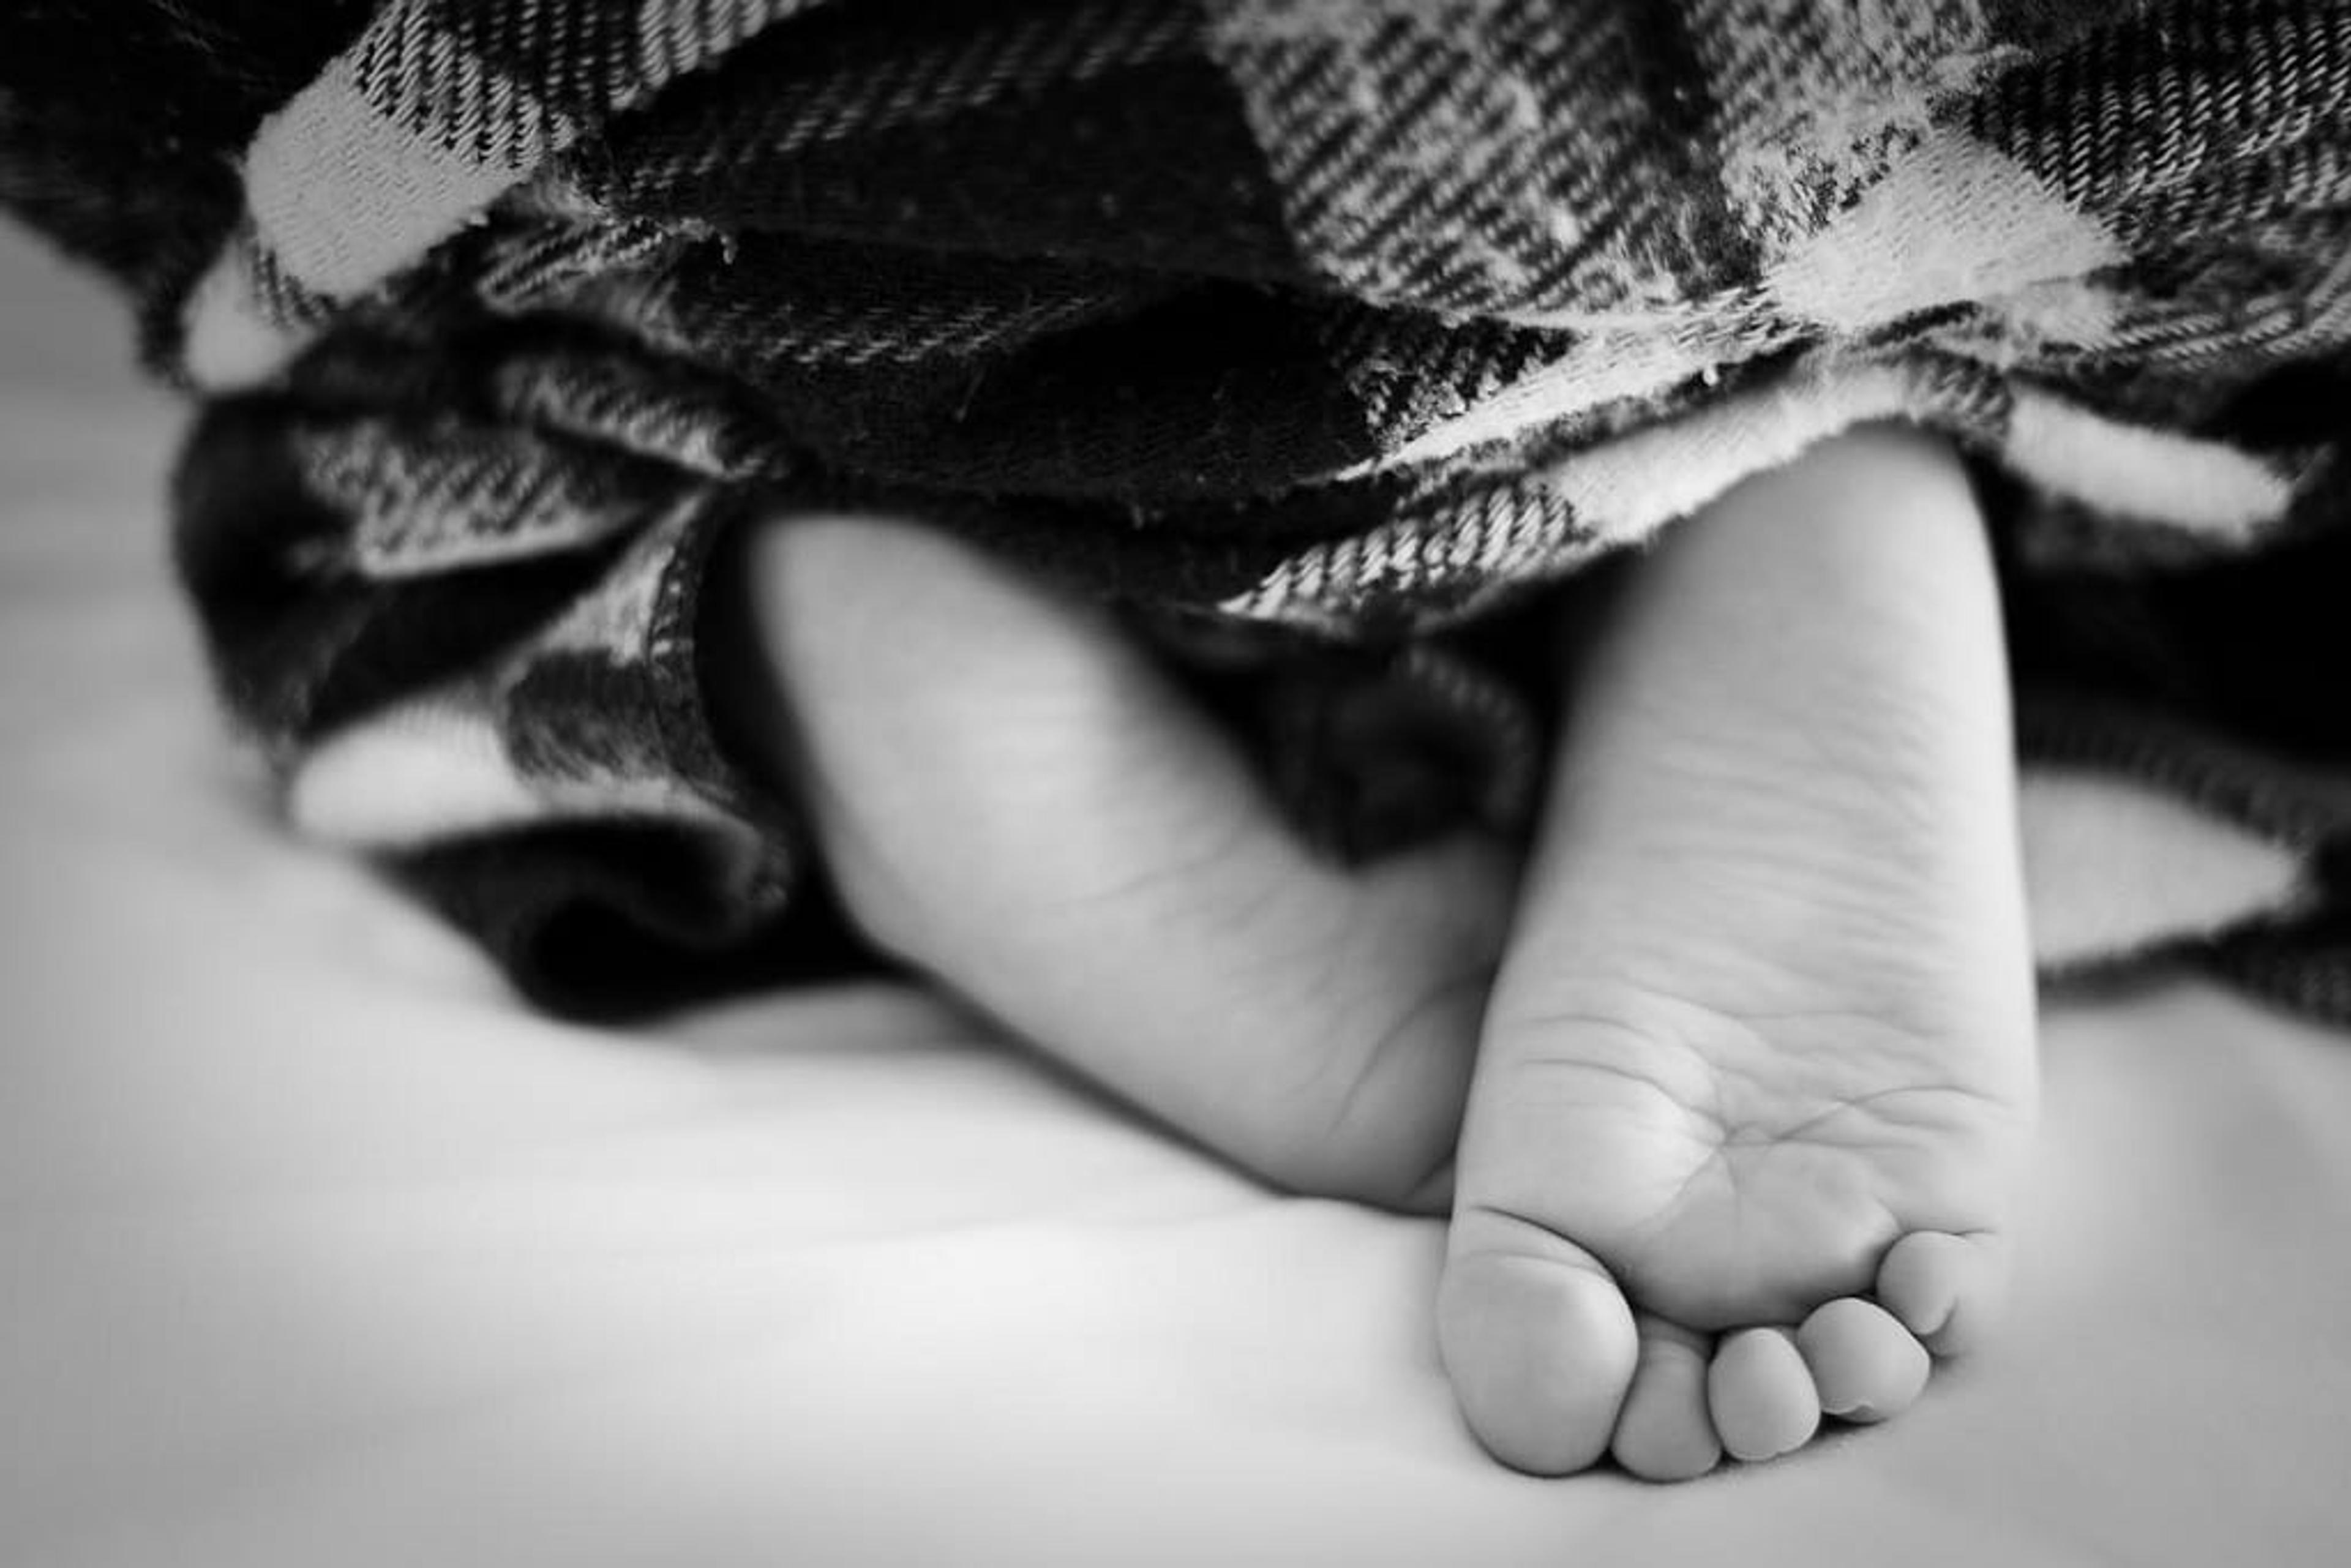 Black and white image of a child's feet under a blanket